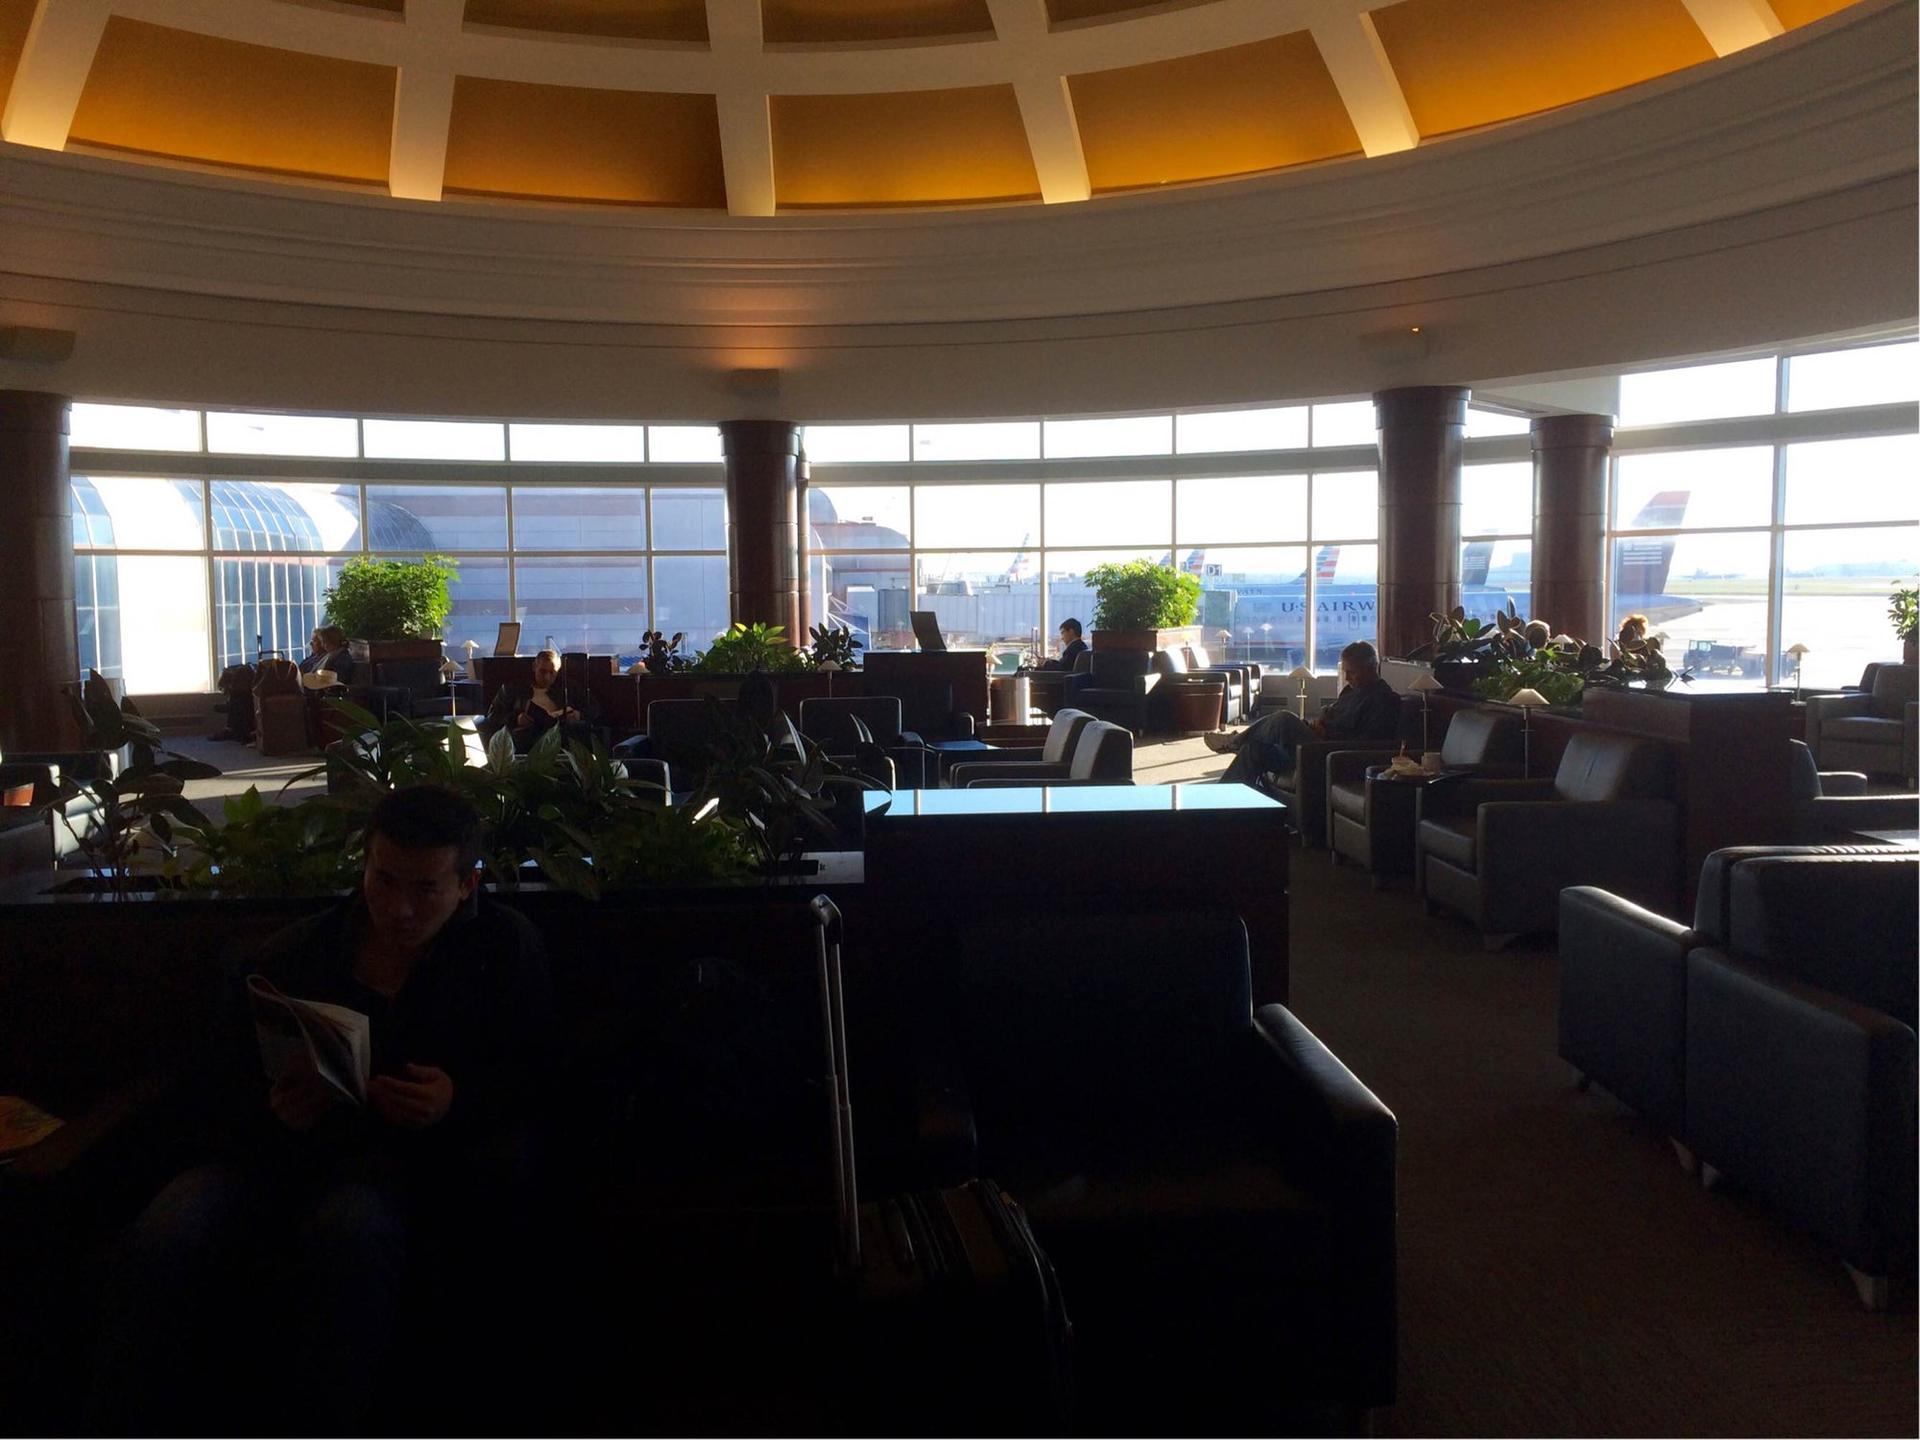 American Airlines Admirals Club image 29 of 37